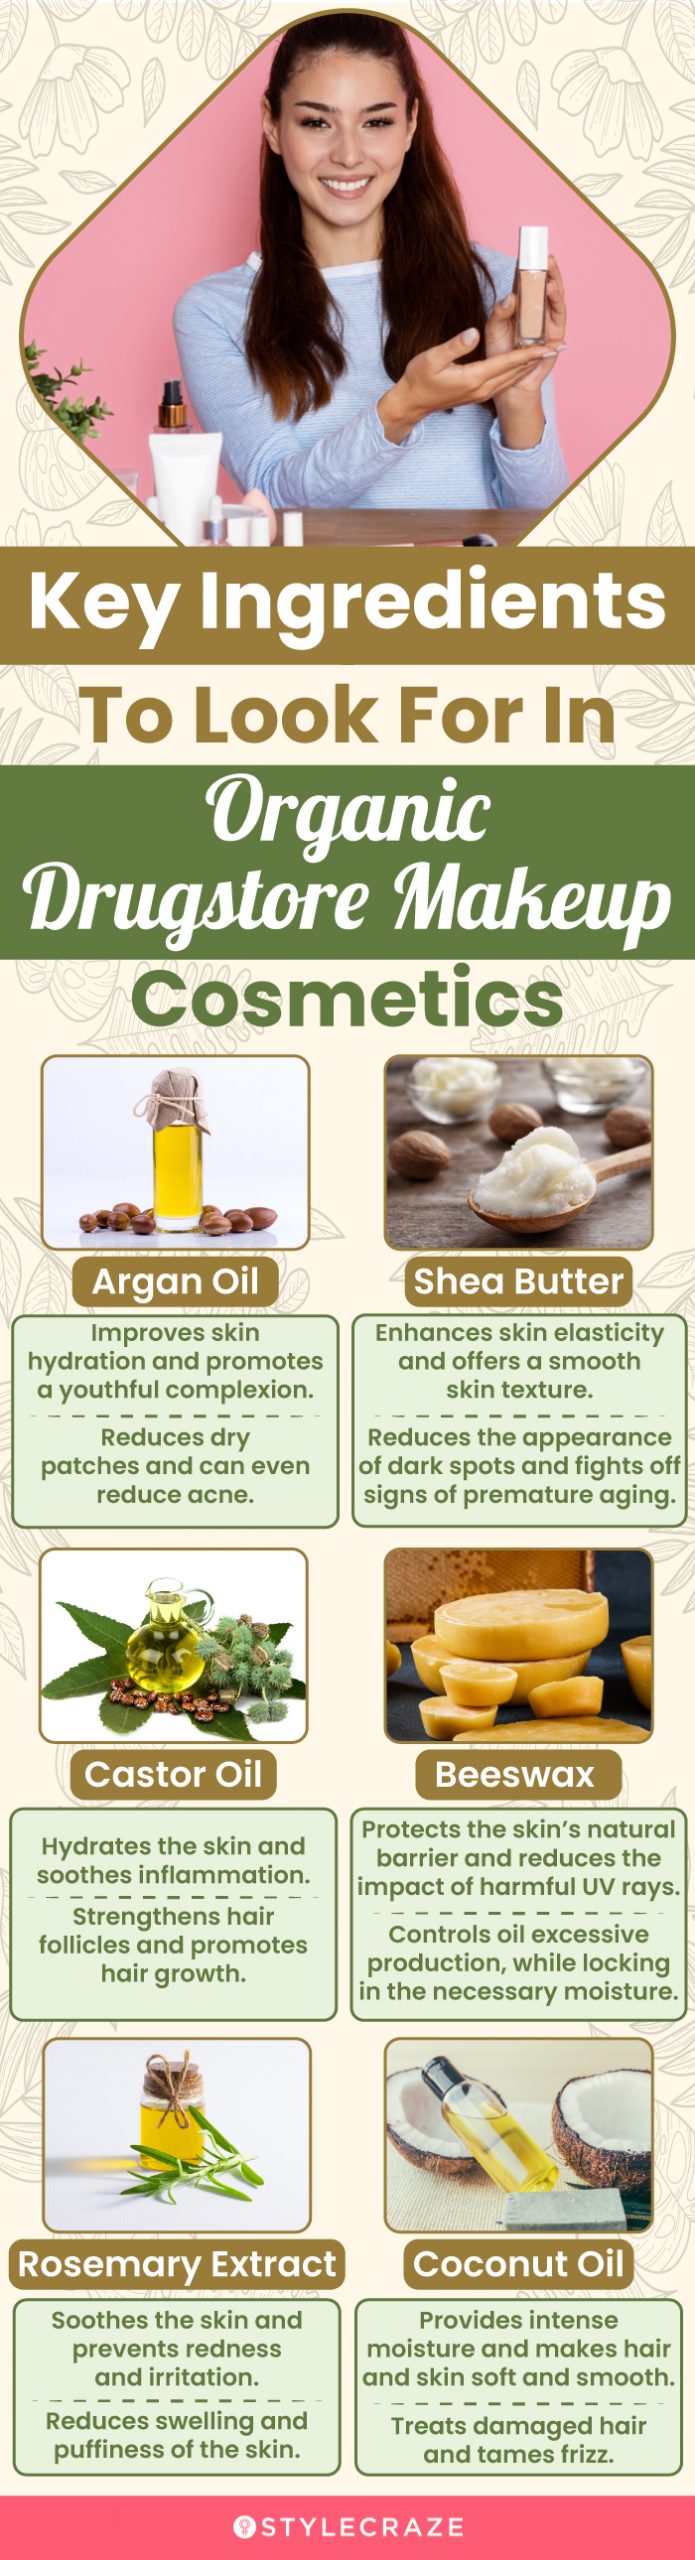 Key Ingredients To Look For In Organic Drugstore Makeup Cosmetics(infographic)